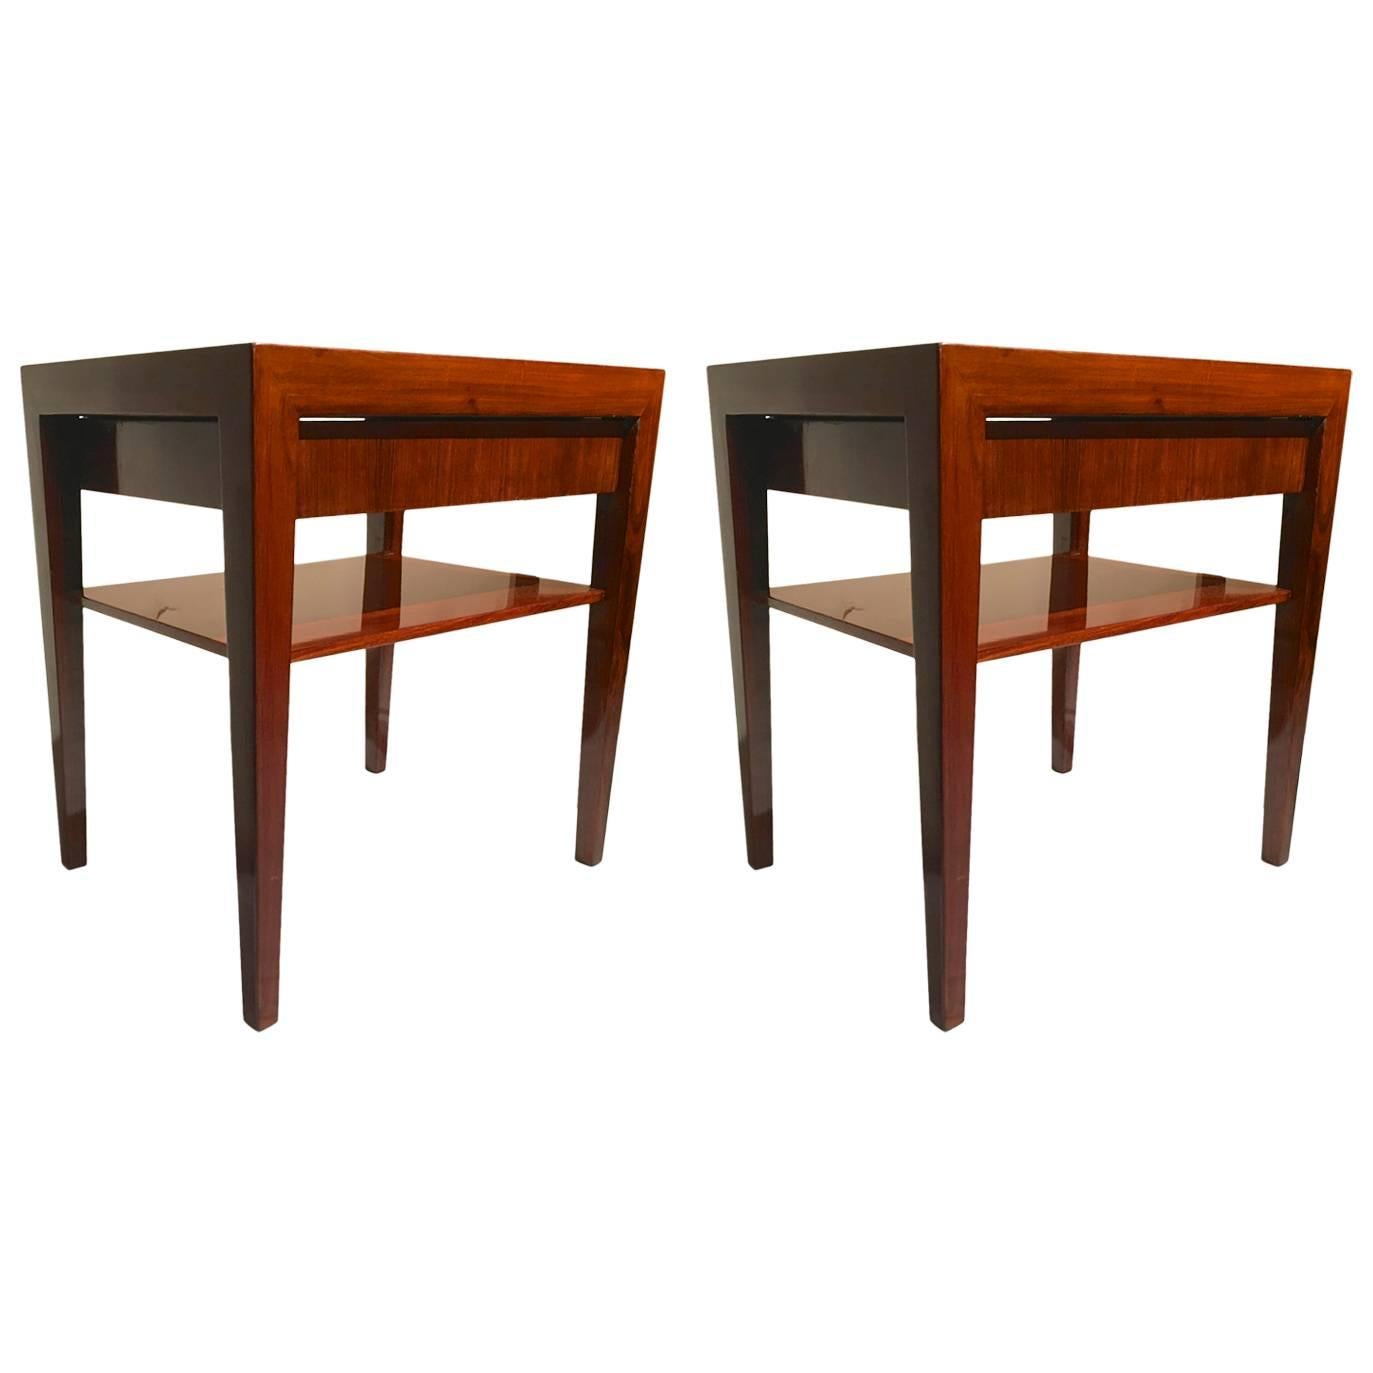 Severin Hansen Rosewood Two-Tier on Drawer Pair of Side Tables or Nightstands